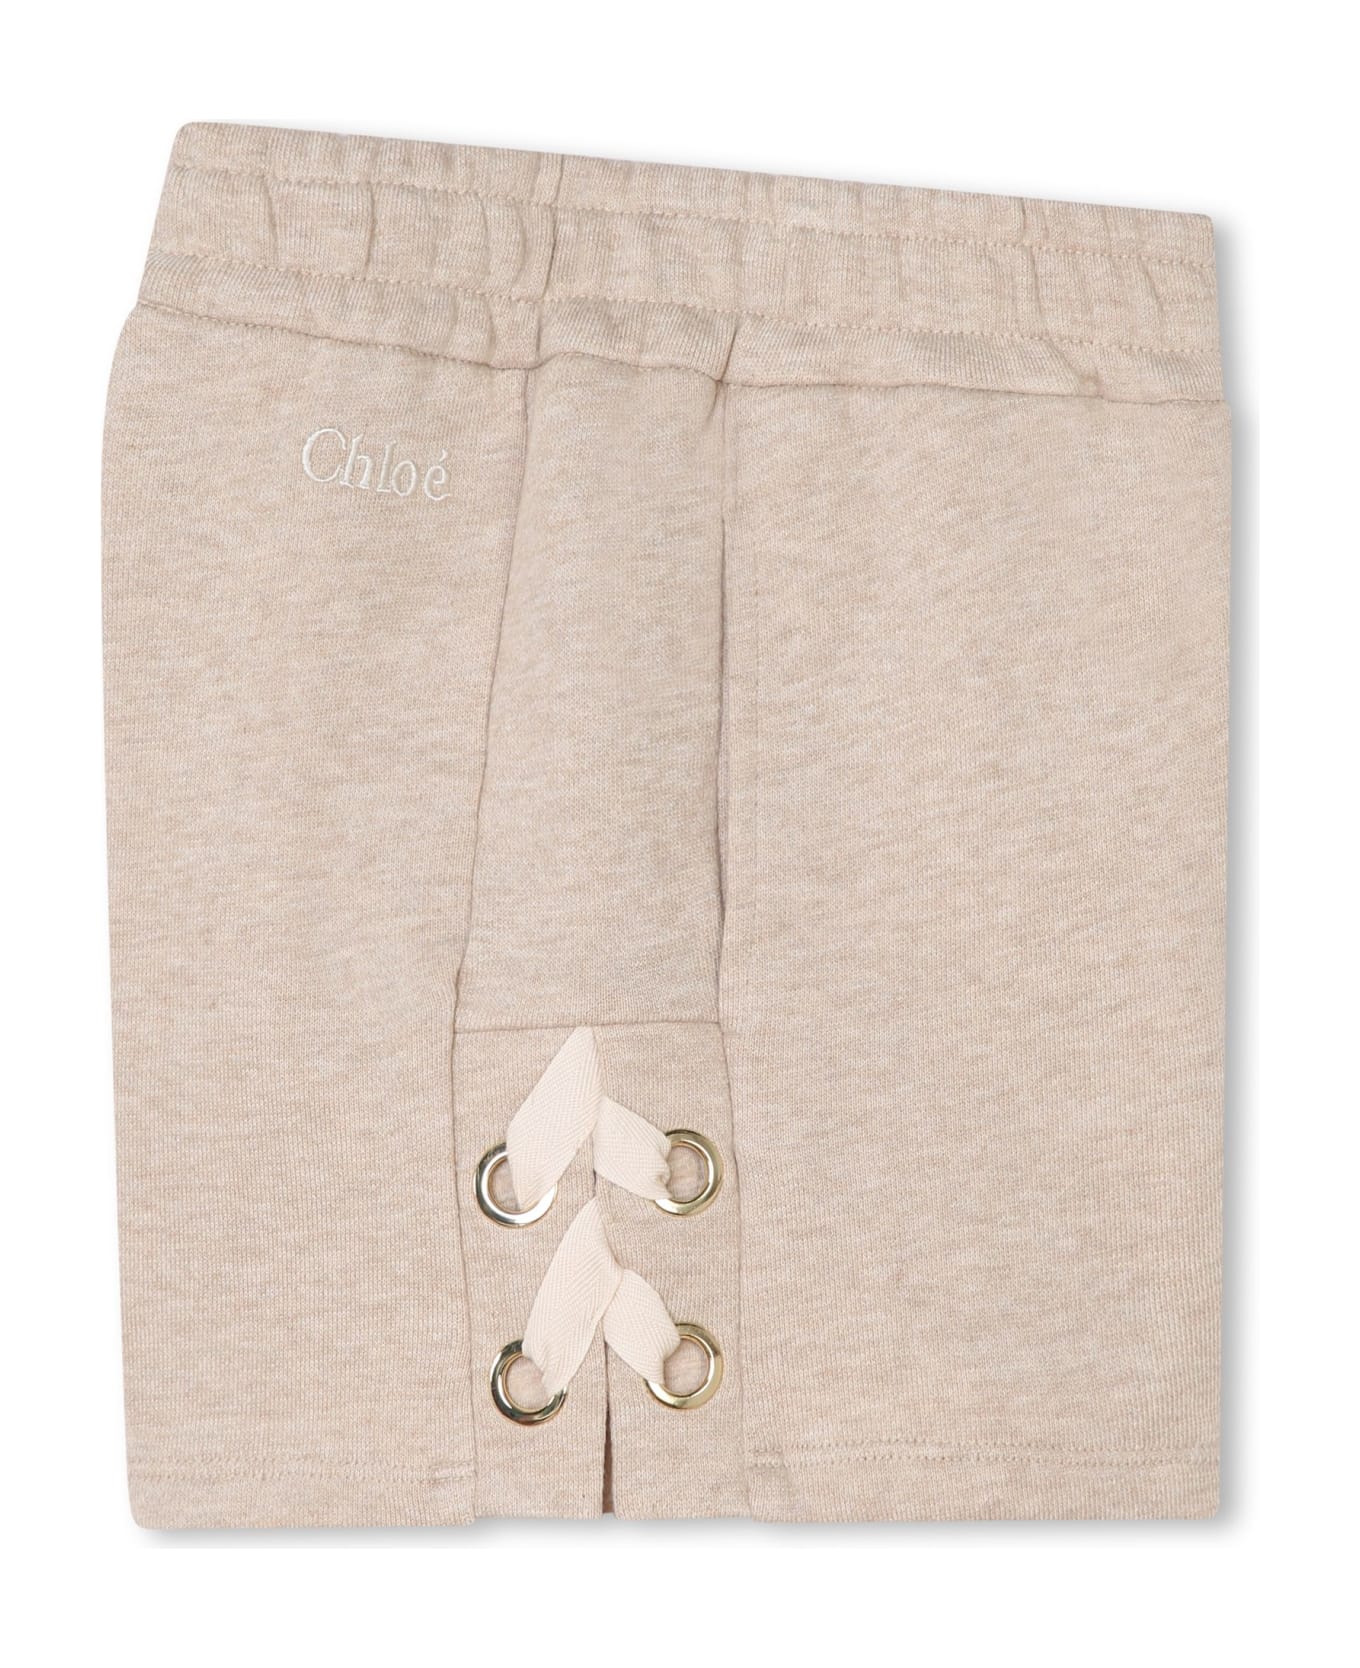 Chloé Shorts With Embroidery - Beige Antico ボトムス